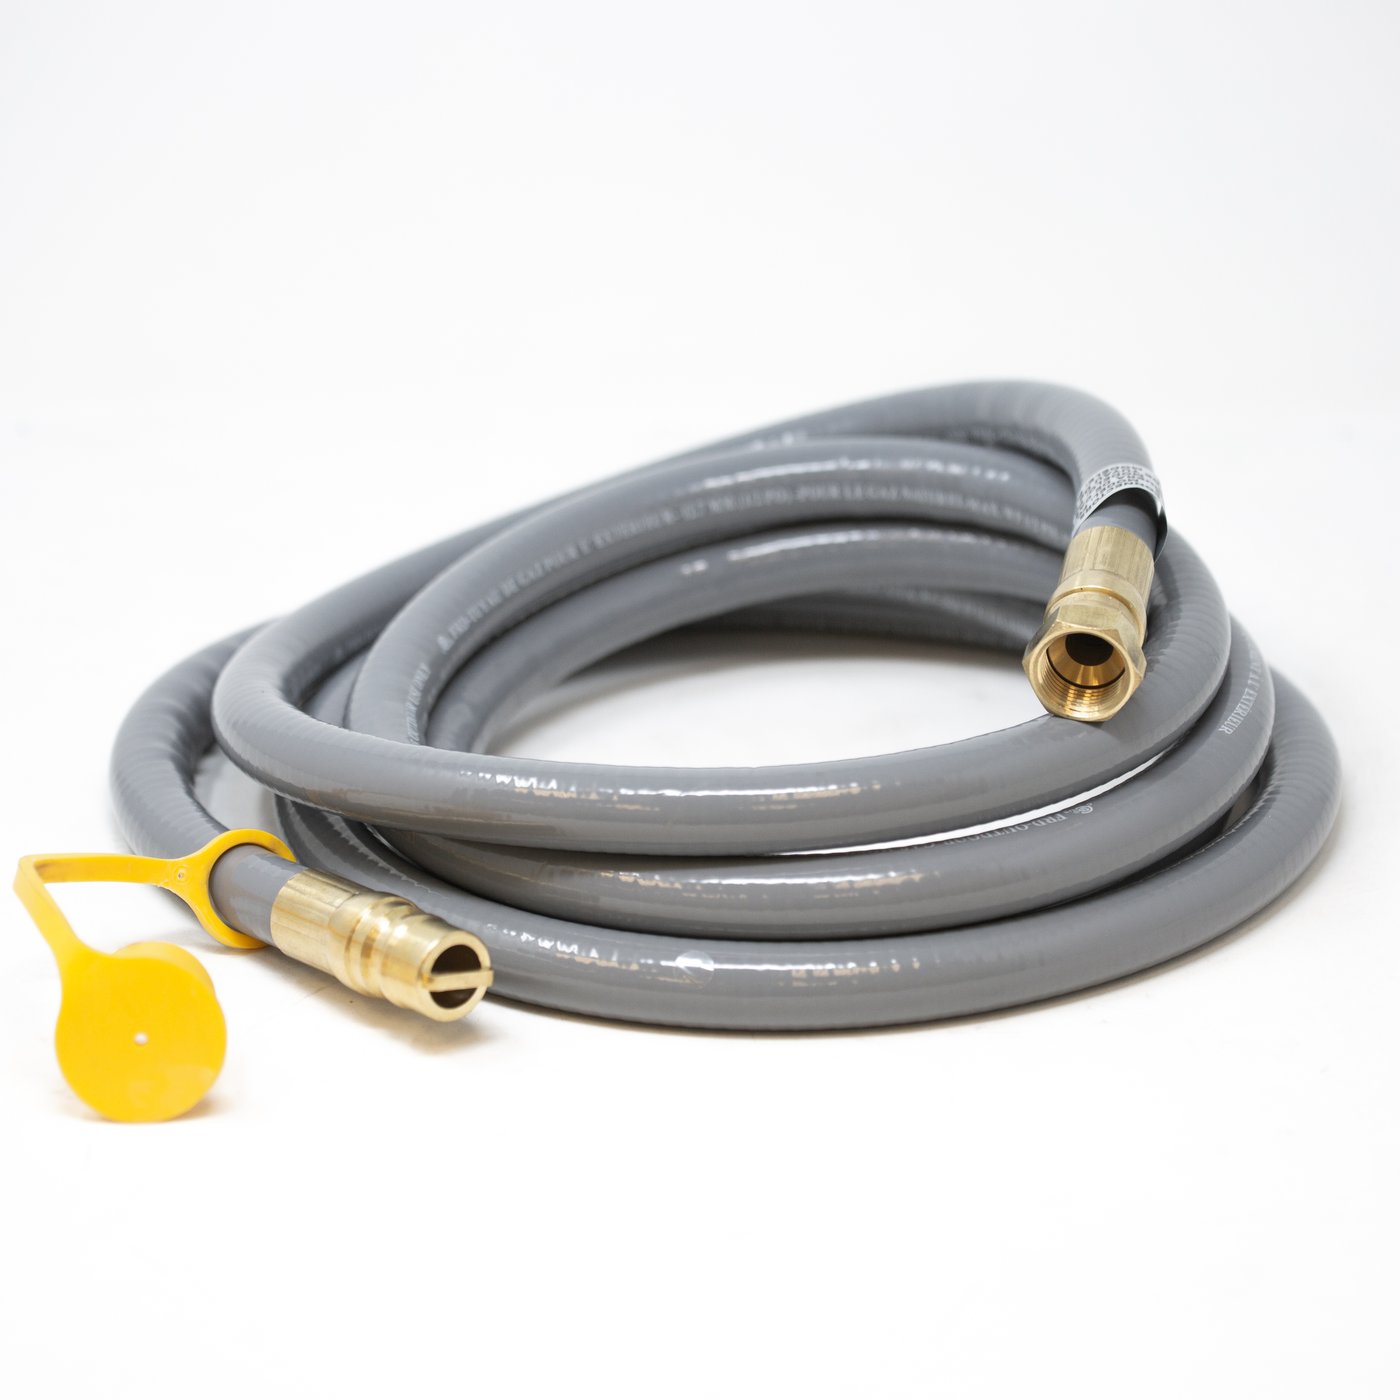 Firman 10' Natural Gas Hose With Storage Strap 1805 New